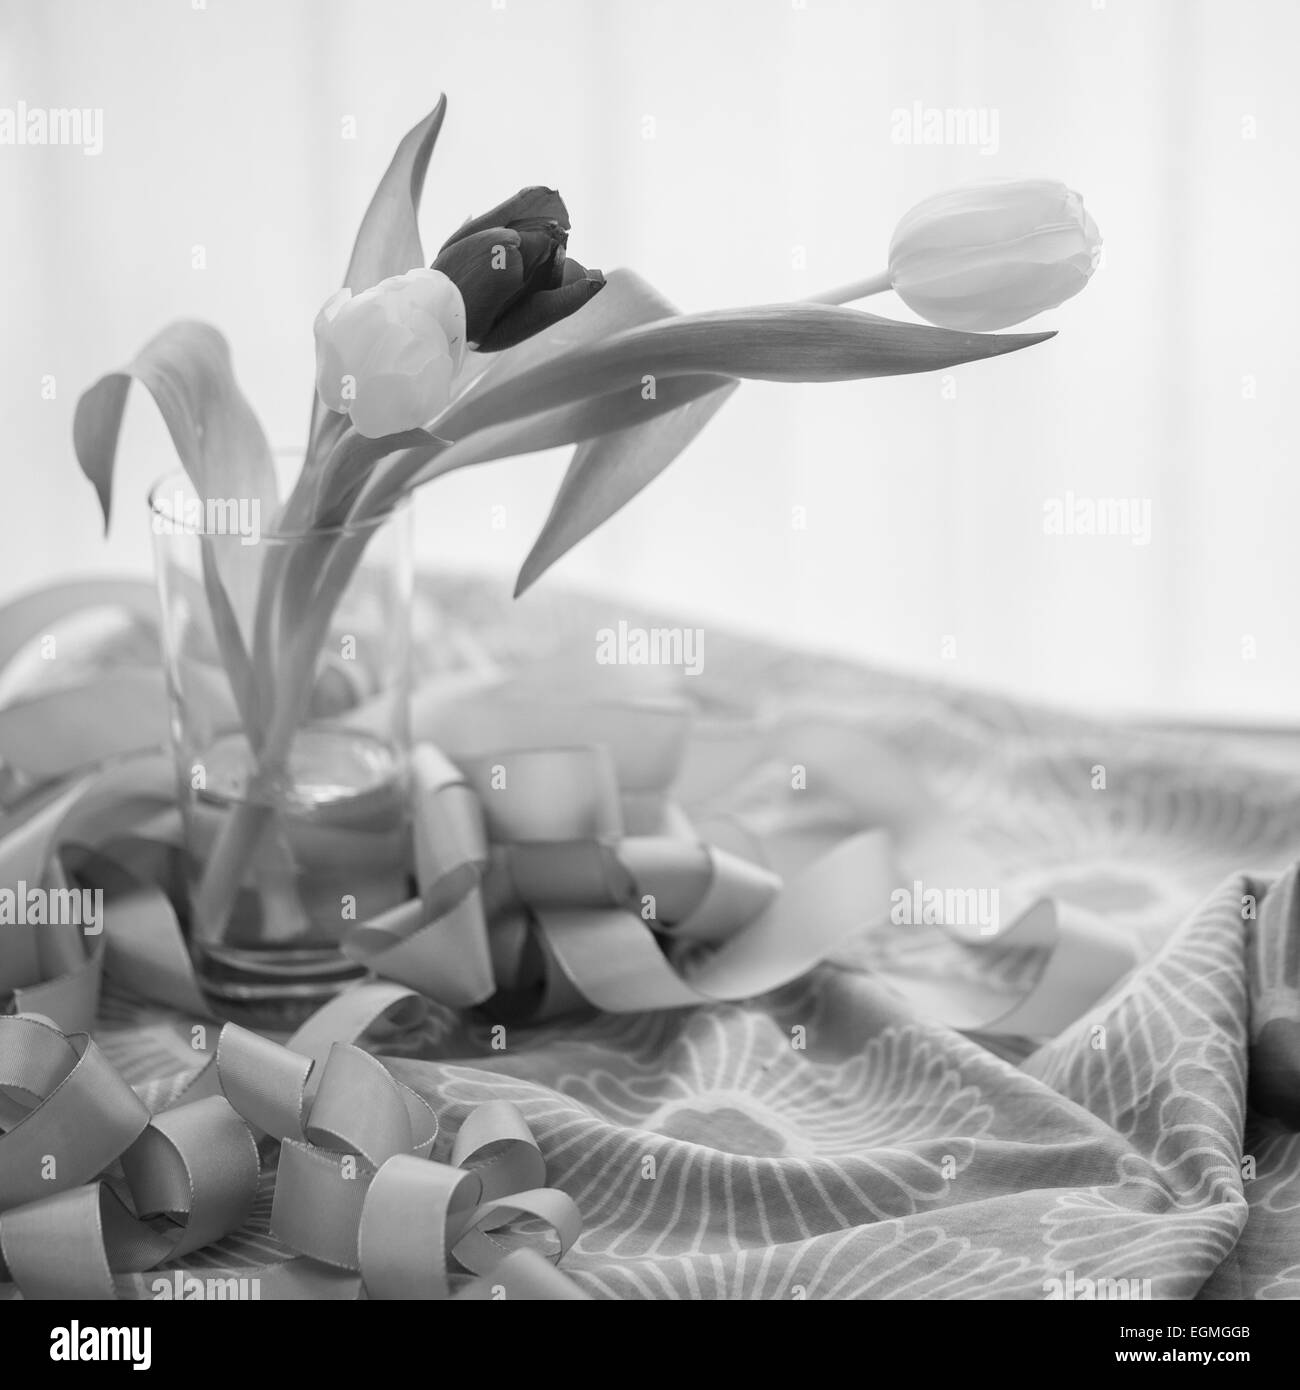 Tulips in Black and White, and images of flowers on the table with ribbon and decorated table cloth Stock Photo